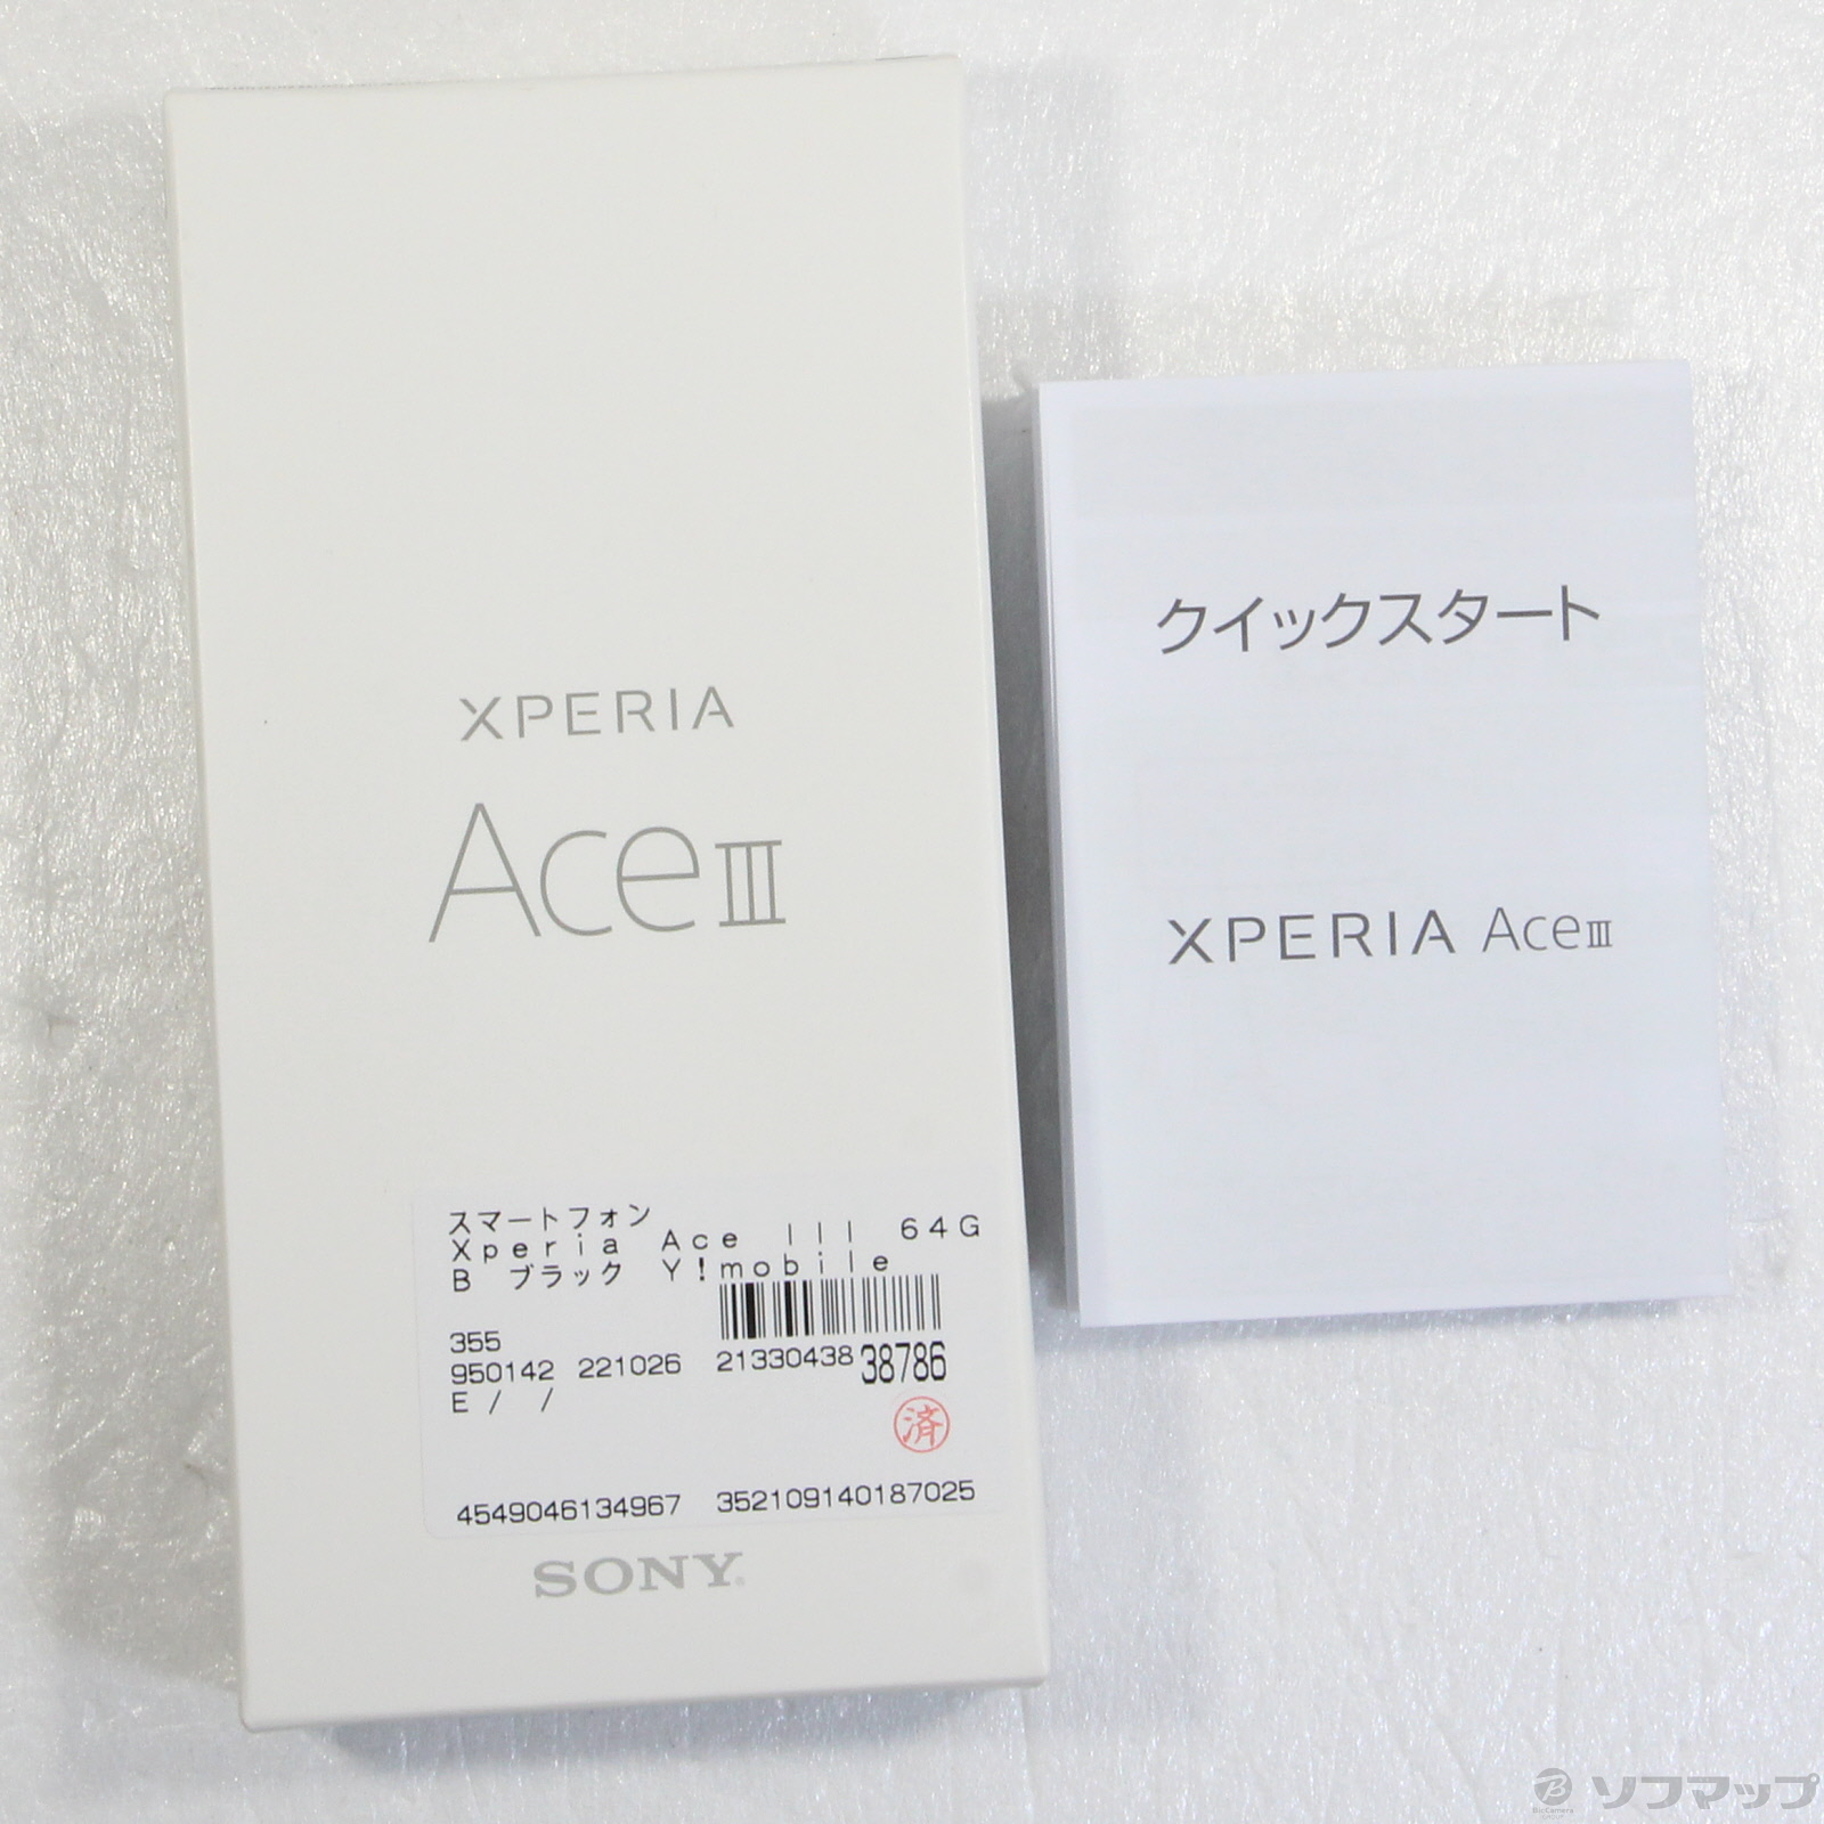 Xperia Ace III 64GB ブラック Y!mobile ◇01/13(金)値下げ！